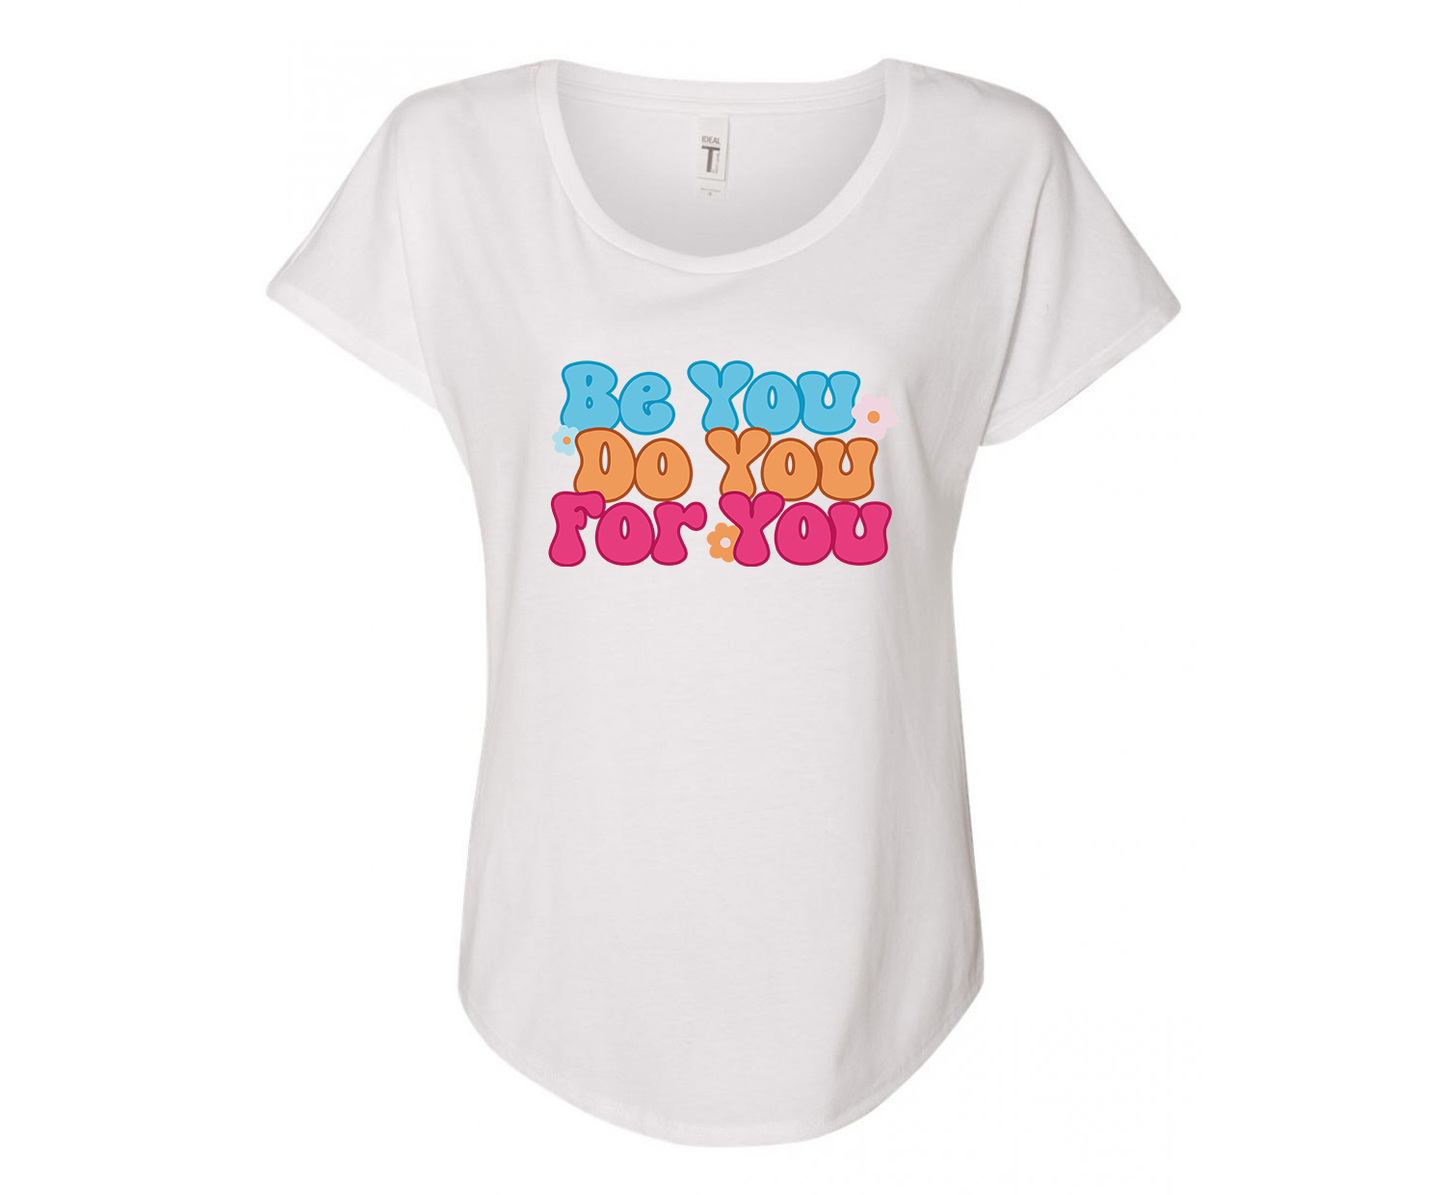 Be You Do You For You Self Love Ladies Tee Shirt - In Grey & White